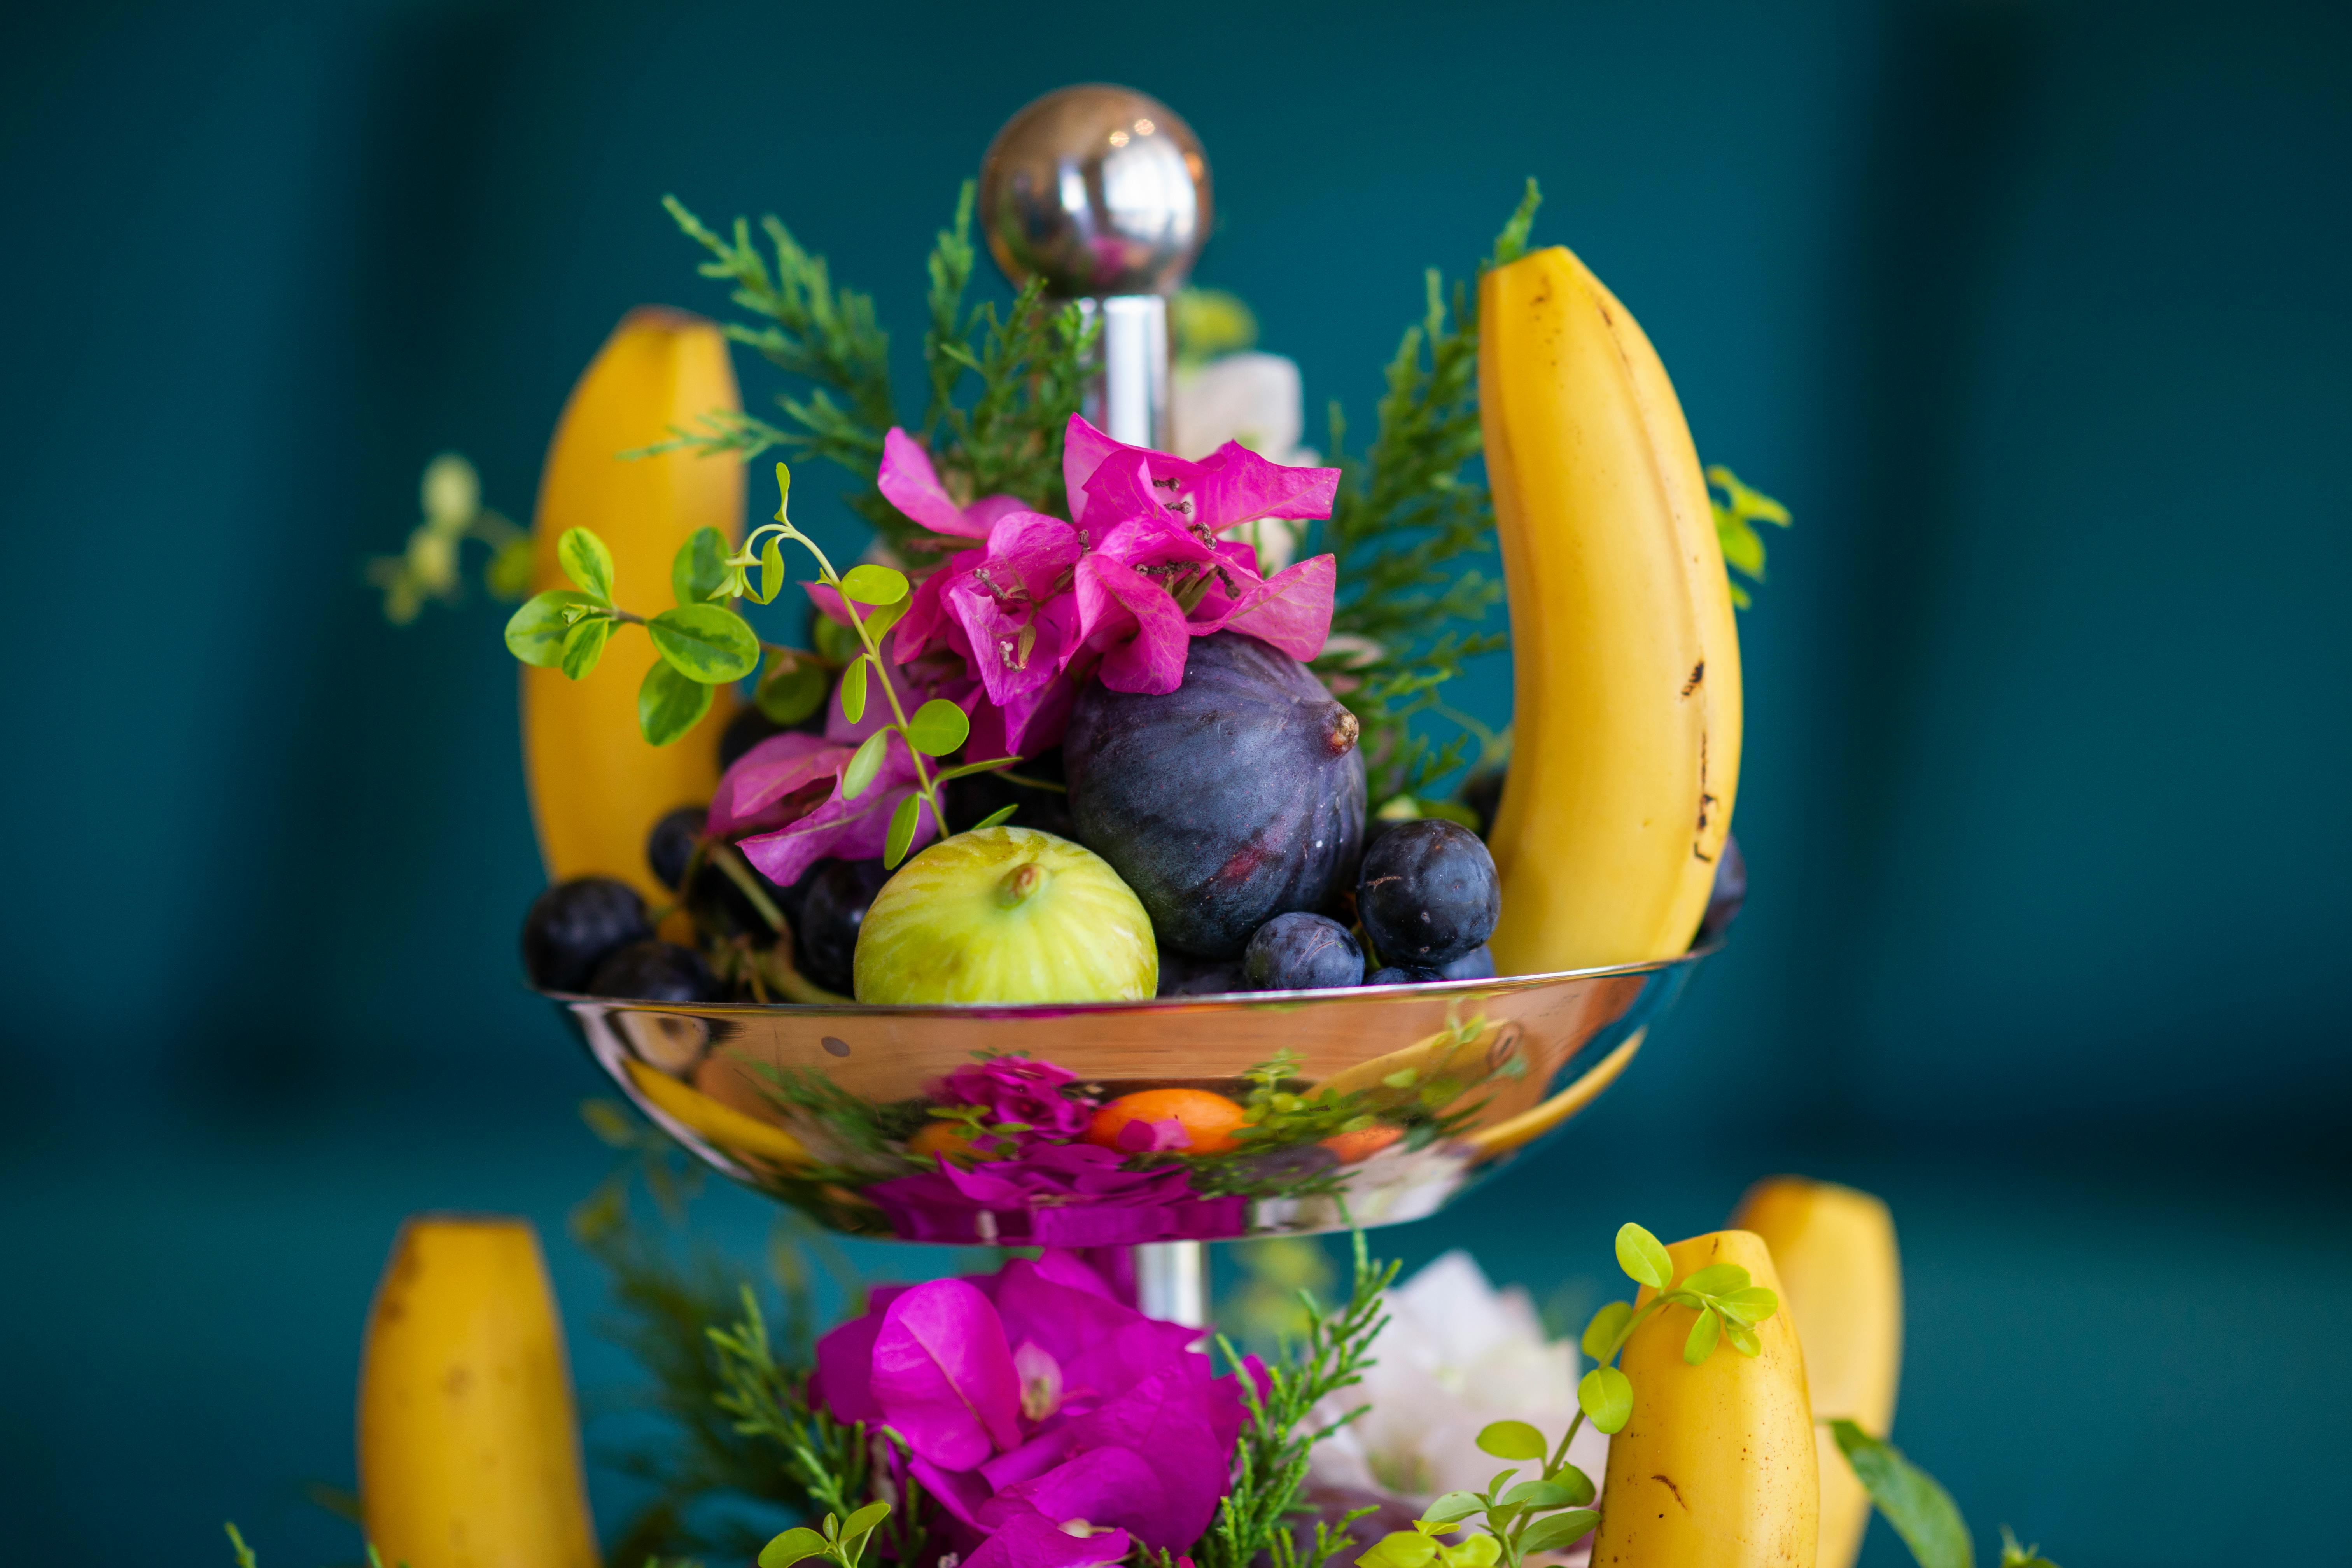 A bowl of fruit with florals.